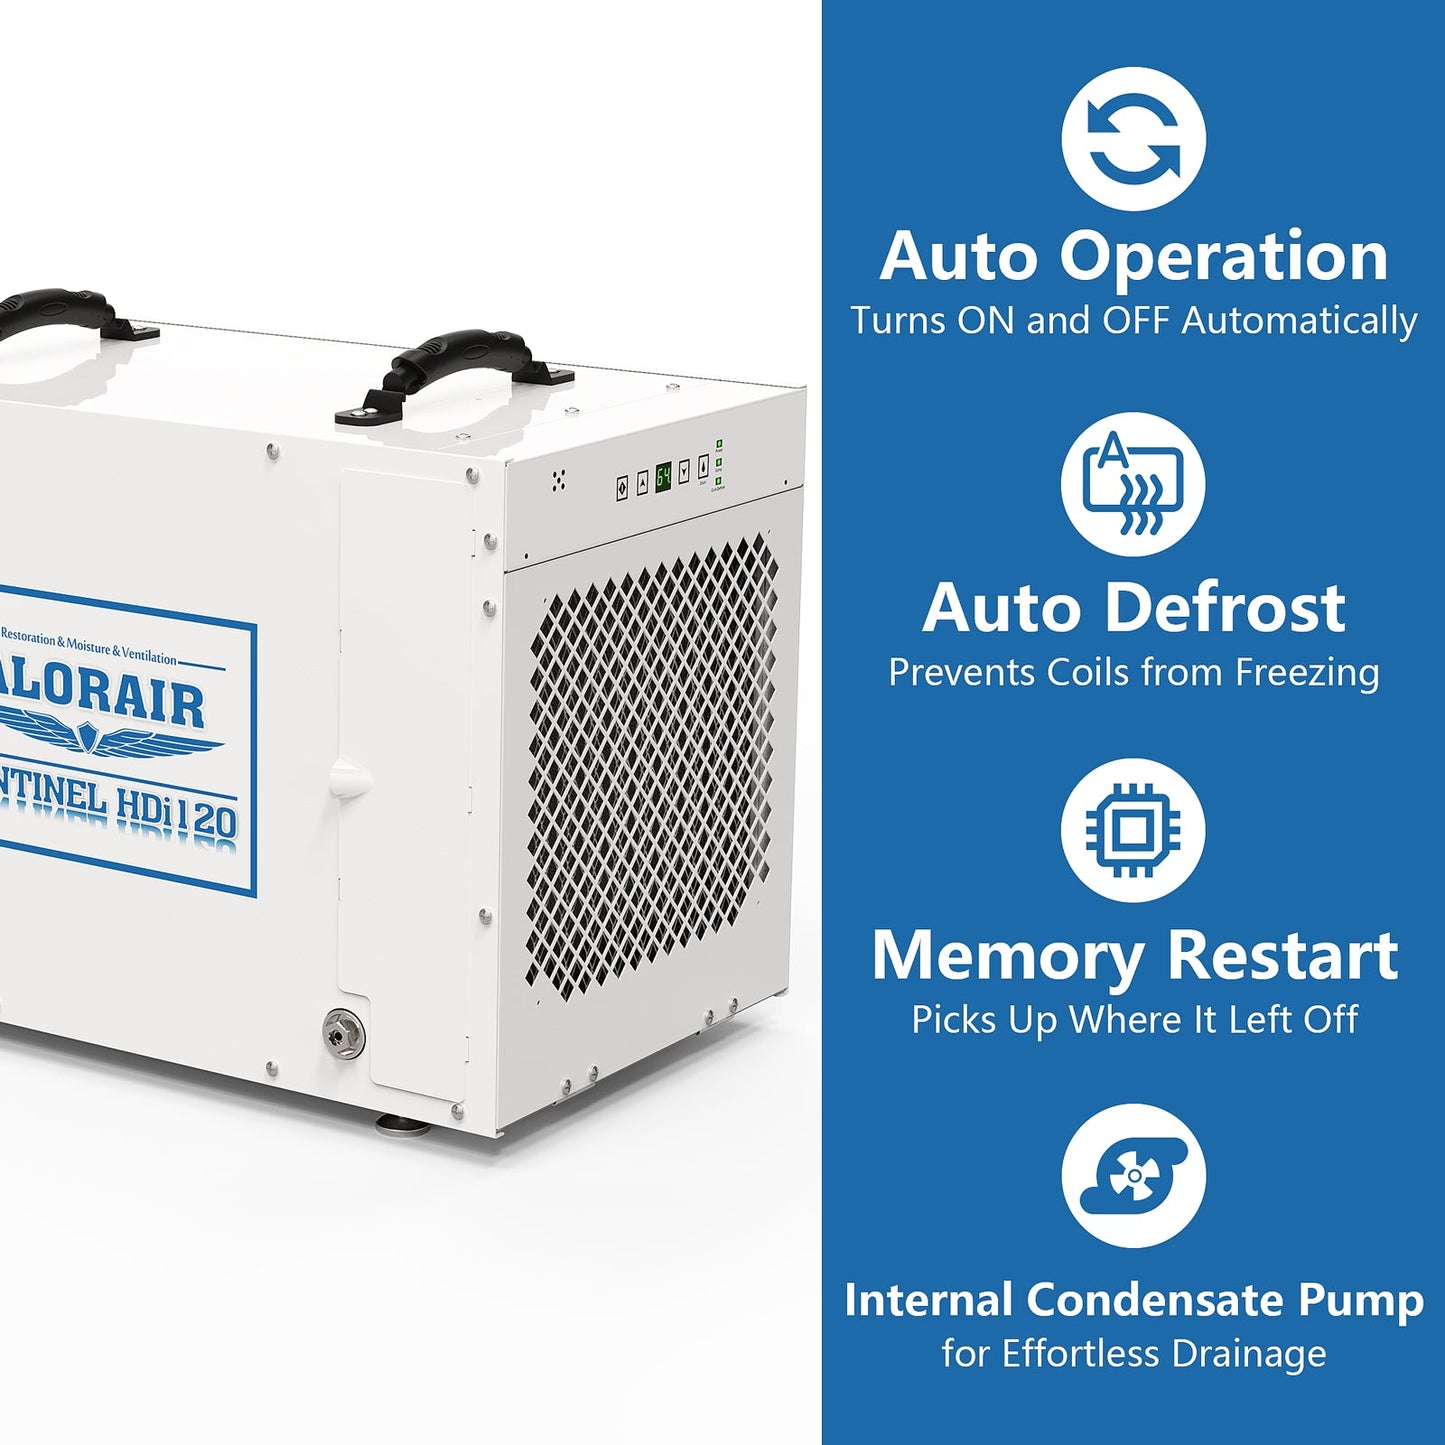 AlorAir Sentinel HDi120 Commercial Dehumidifier with Pump, 235 Pints Whole Homes Dehumidifier for Crawl Spaces, Basements, up to 3,300 sq. ft. 5 Years Warranty, cETL, Optional Remote Monitoring AlorAir